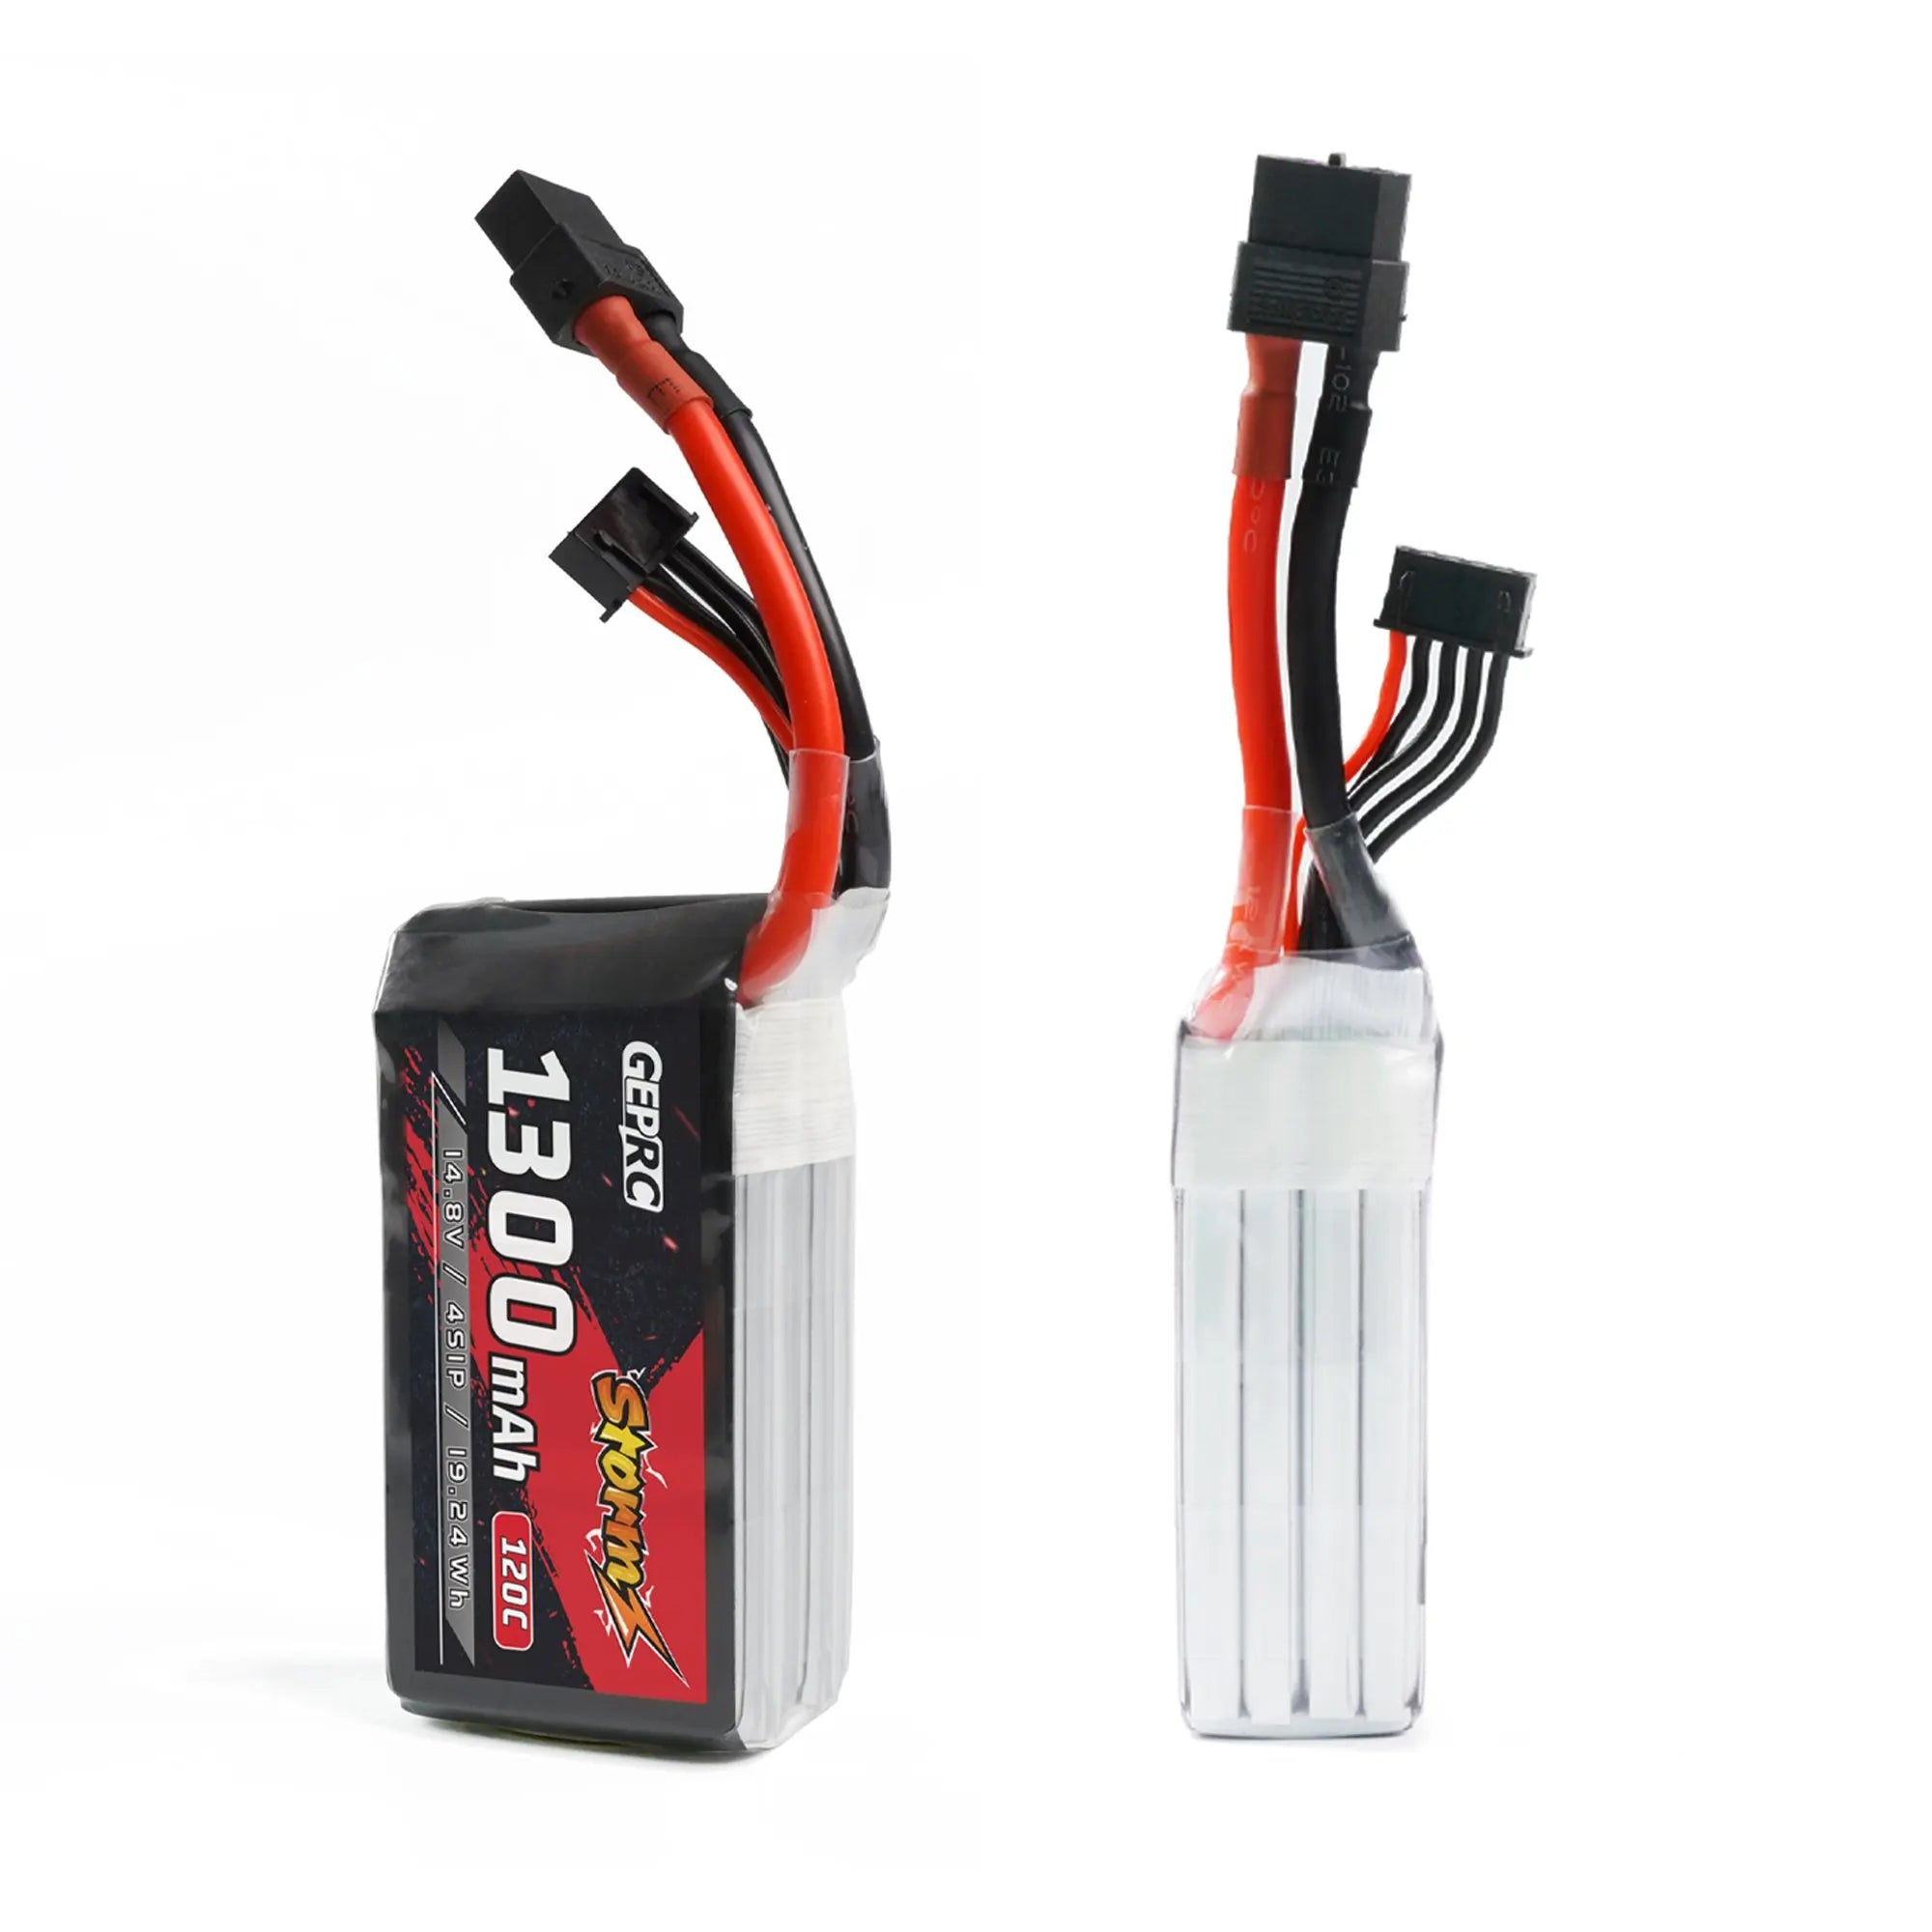 GEPRC Storm 4S 1400mAh 120C Lipo Battery, if you accidentally touch the electrolyte, please wash it with clean water